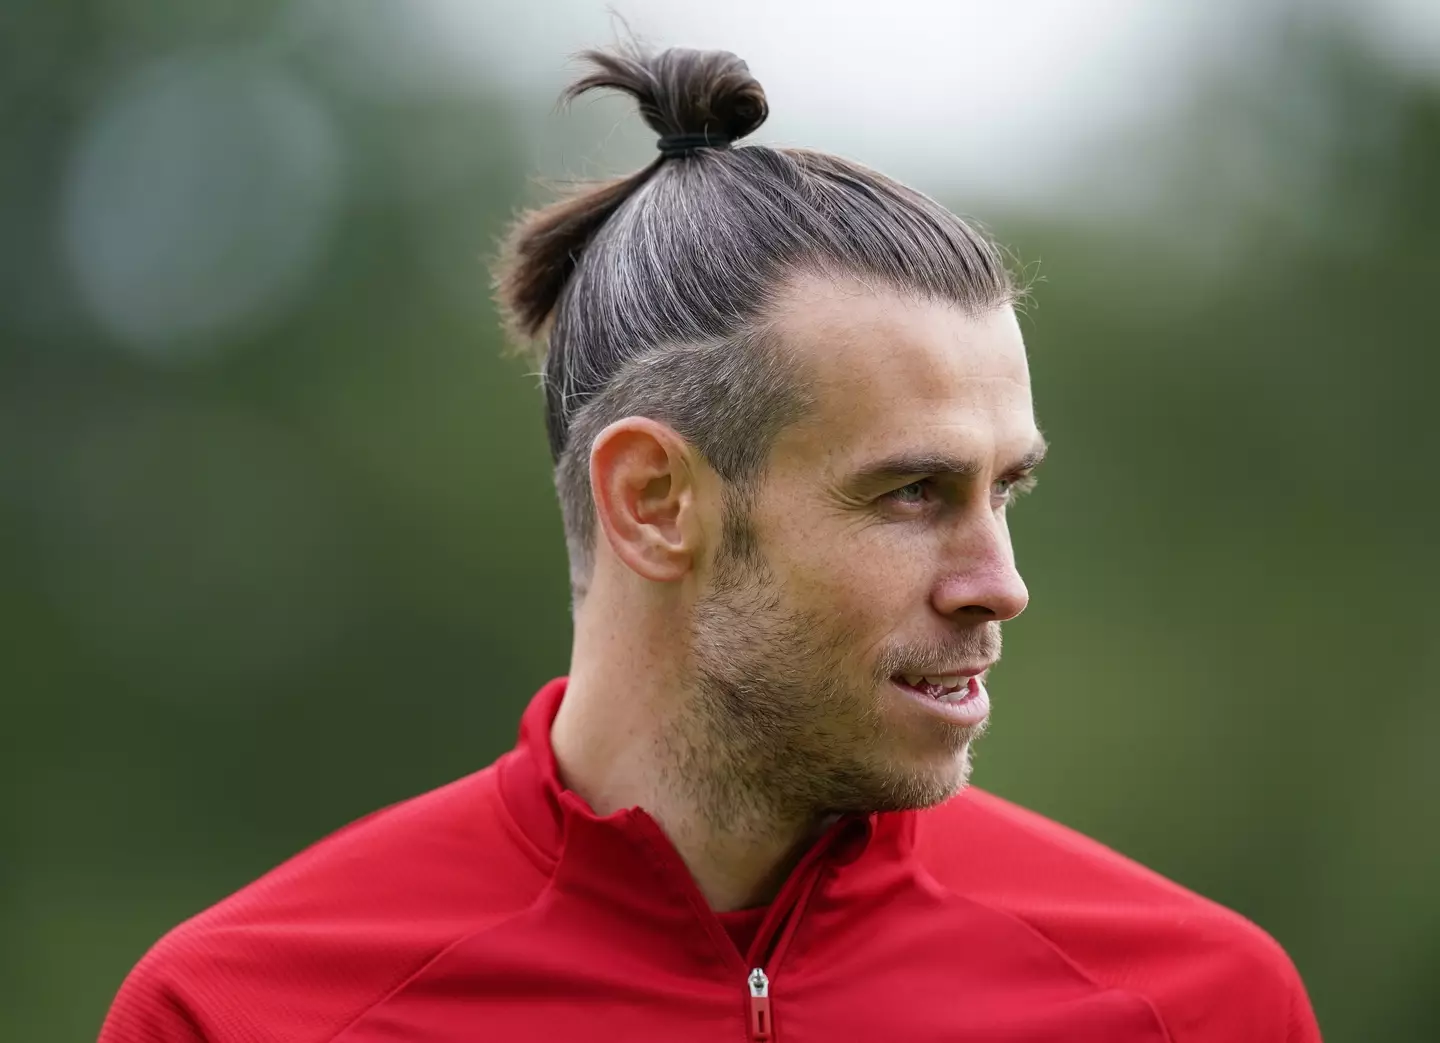 Gareth Bale has been named in Wales' squad for their World Cup qualifiers in September